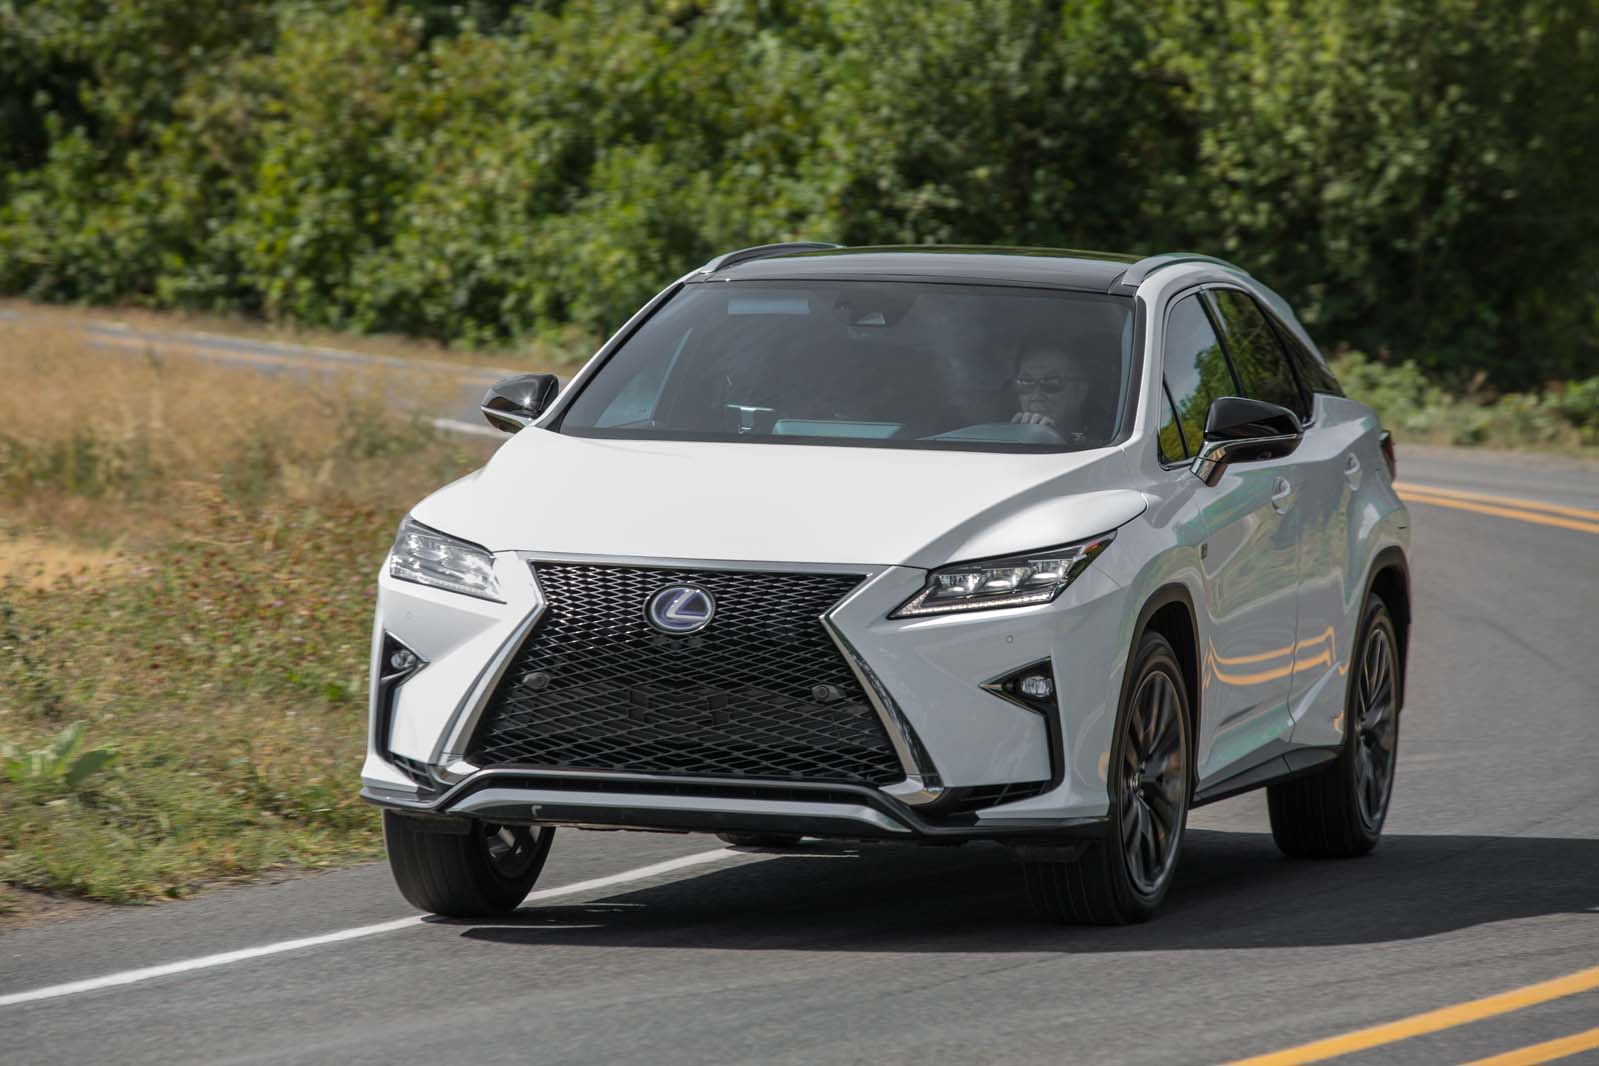 2016 Lexus RX 350 AWD F Sport: Full Gallery and Specifications – Clublexus